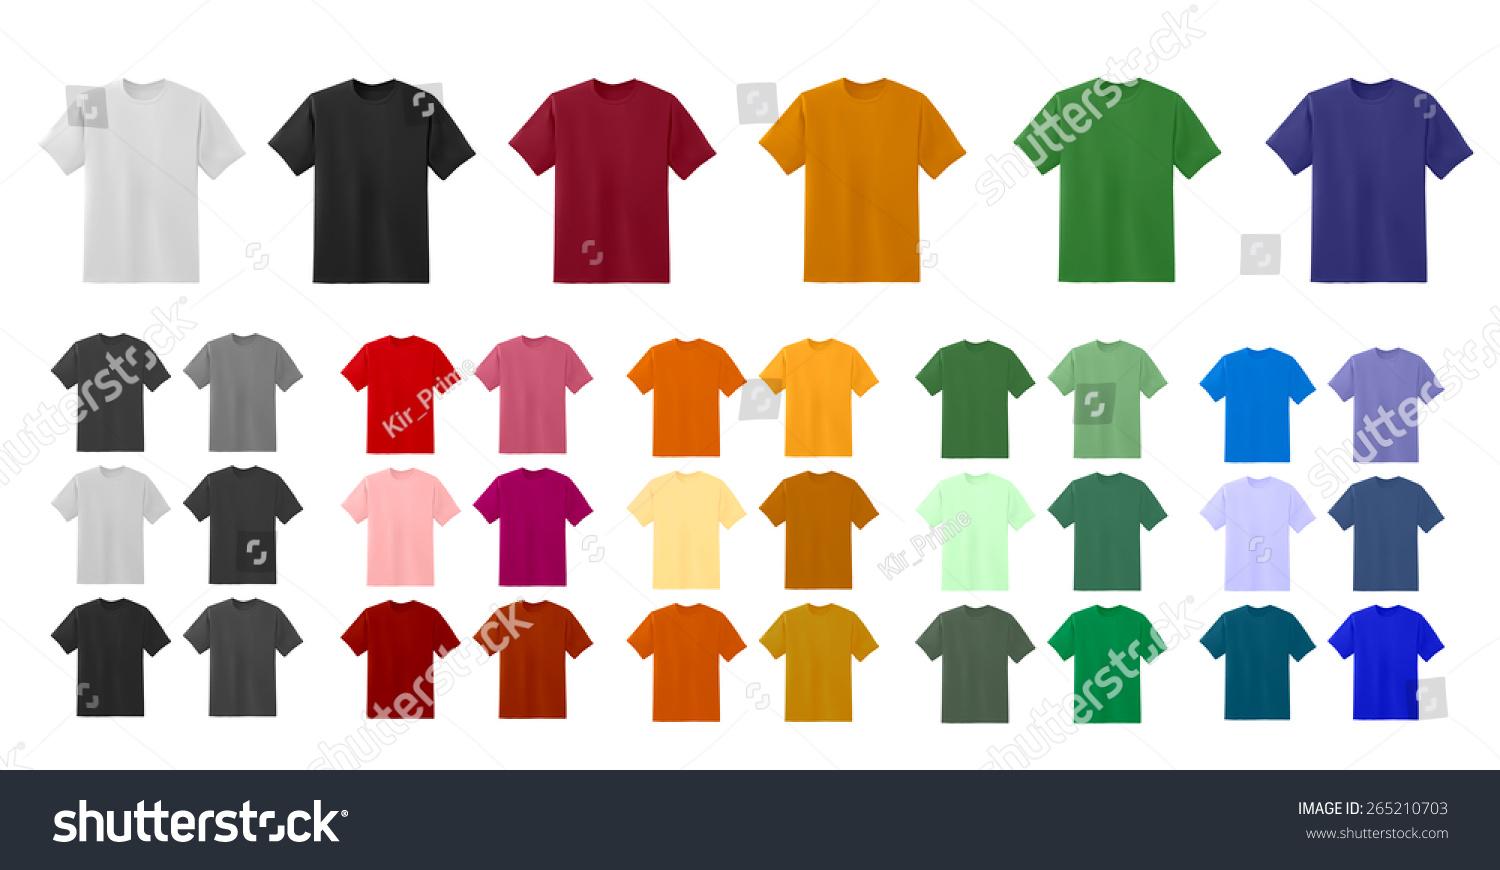 Big t-shirt templates collection of different colors, vector eps10 illustration.  #265210703